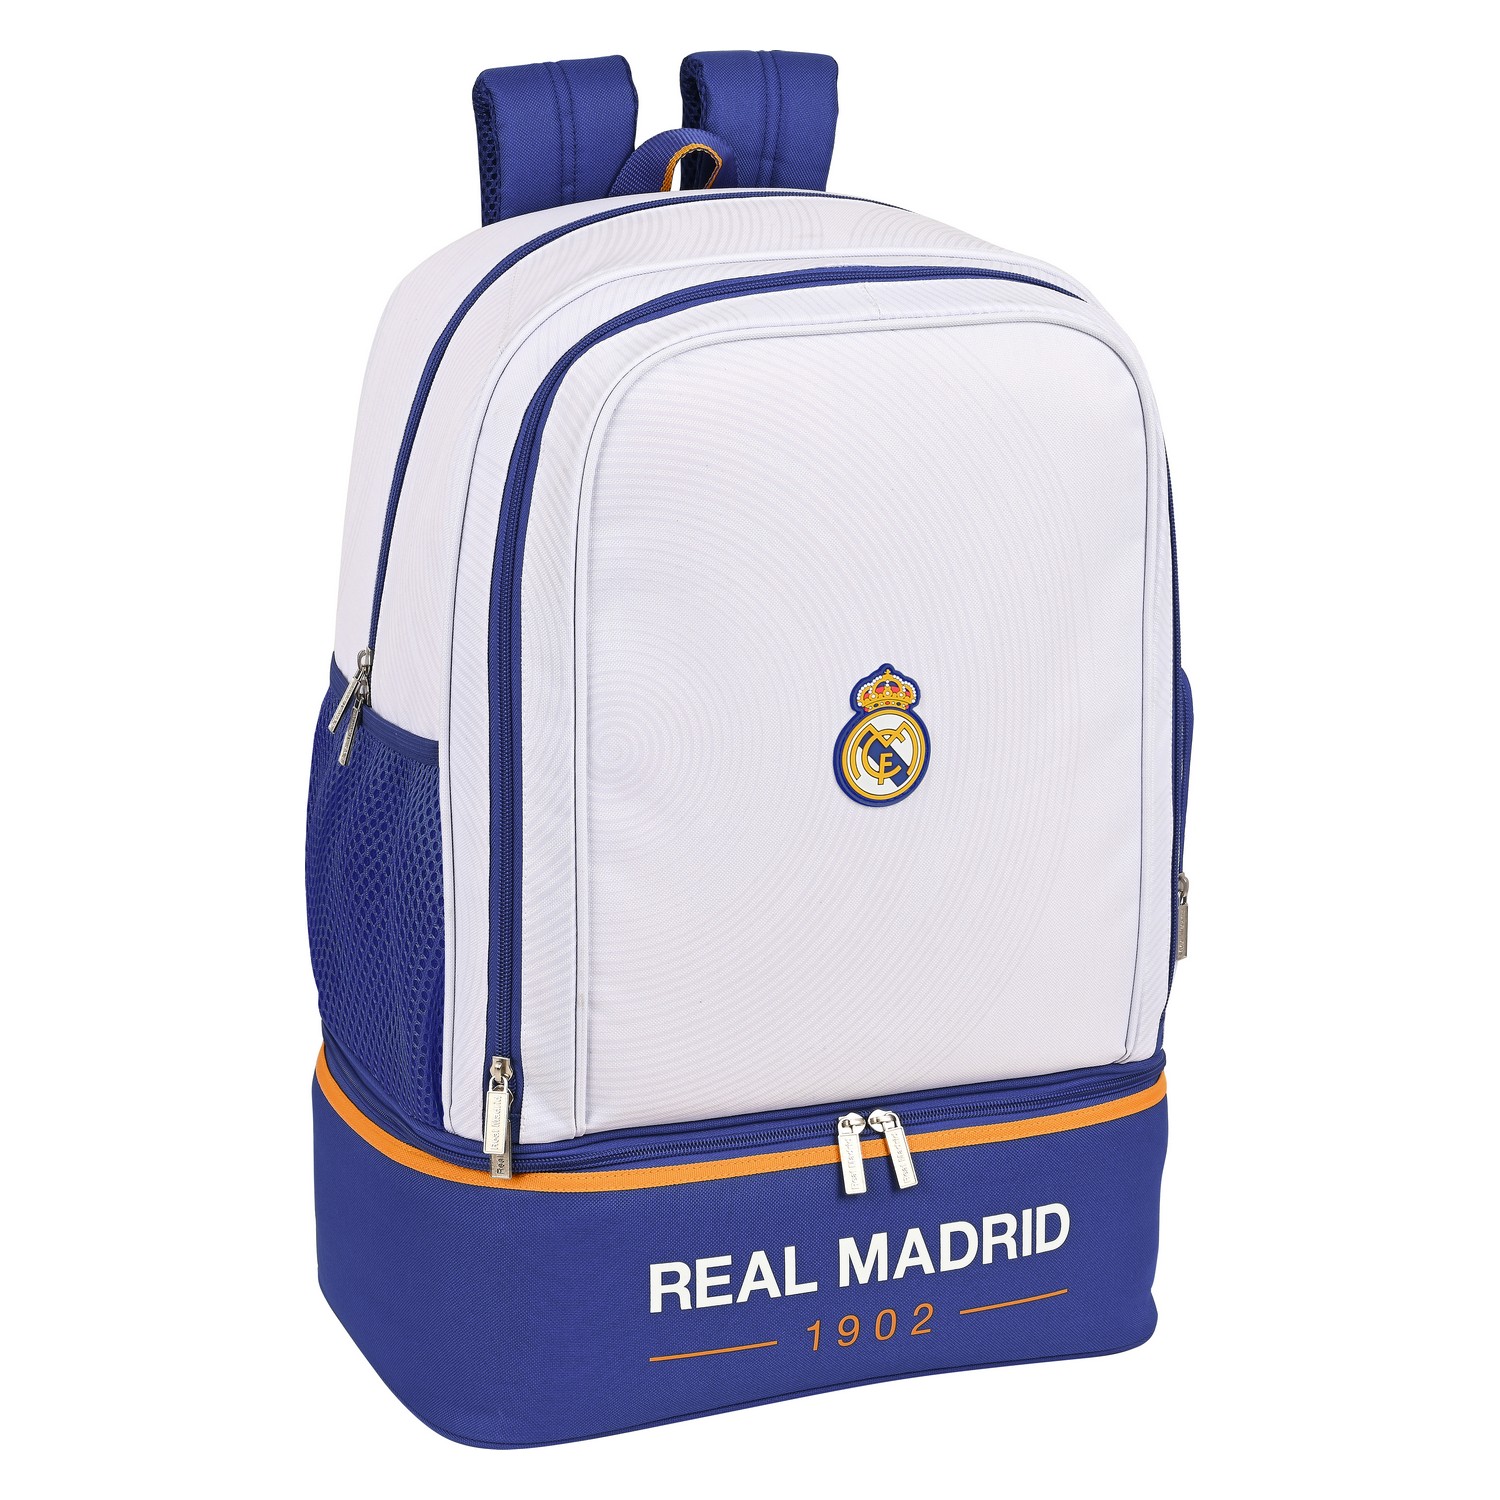 Sports Bag with Shoe holder...